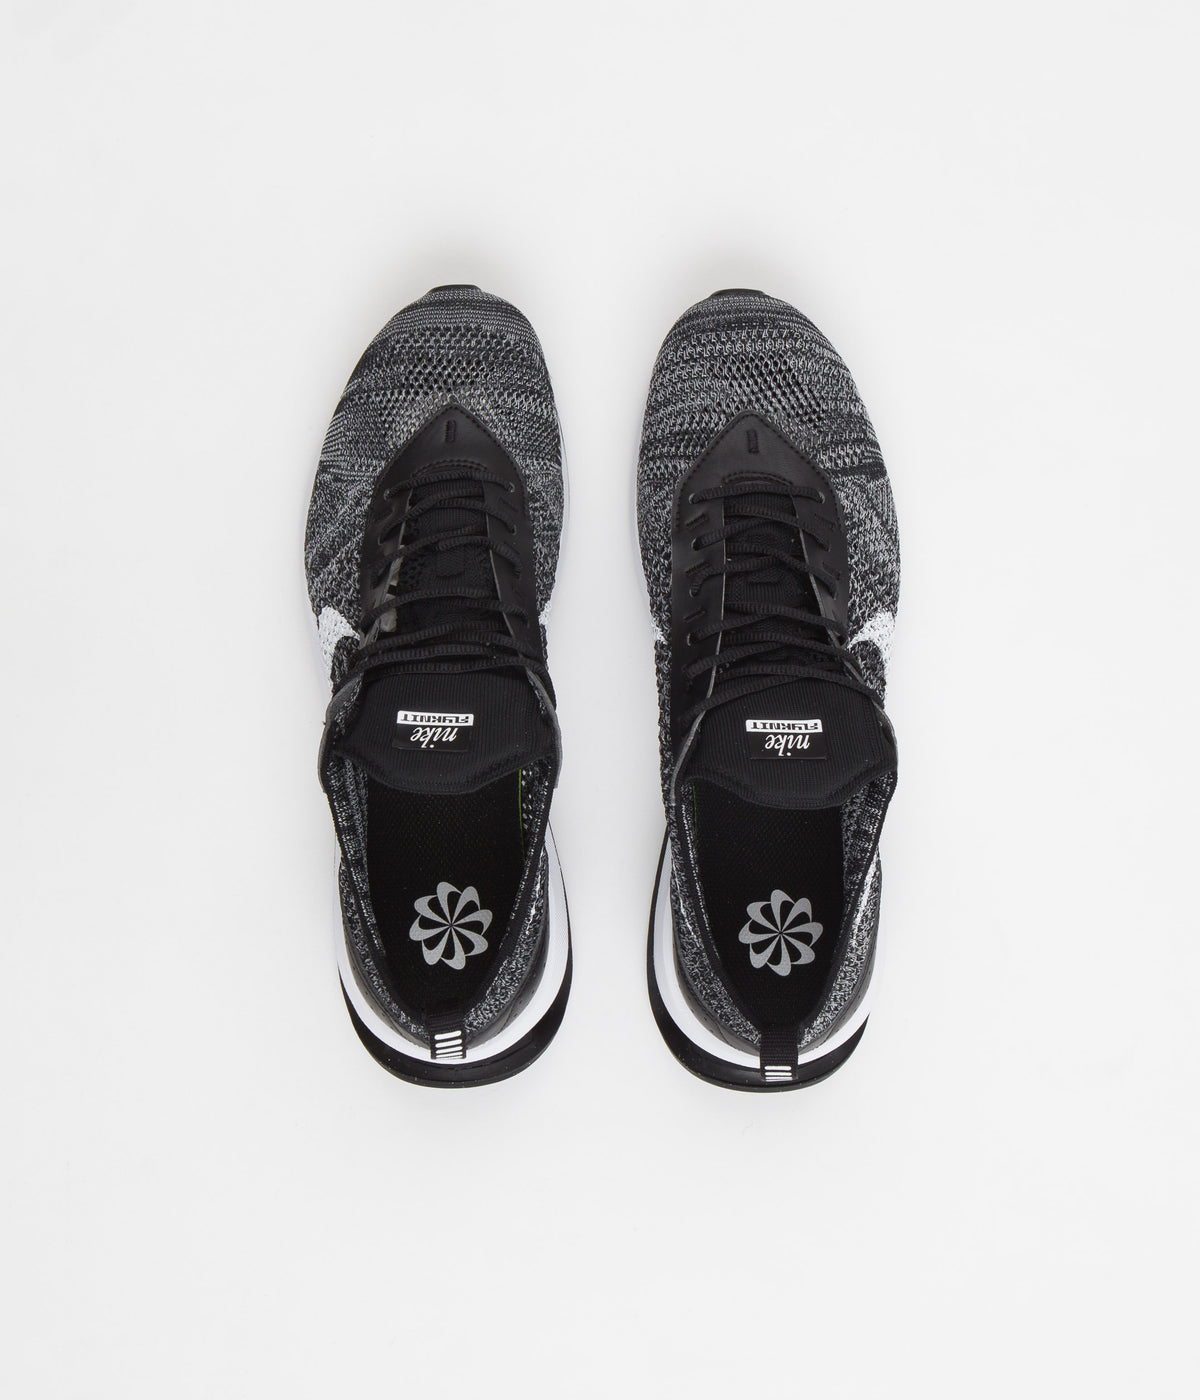 Nike Max Flyknit Racer Shoes - Black / White | in Colour